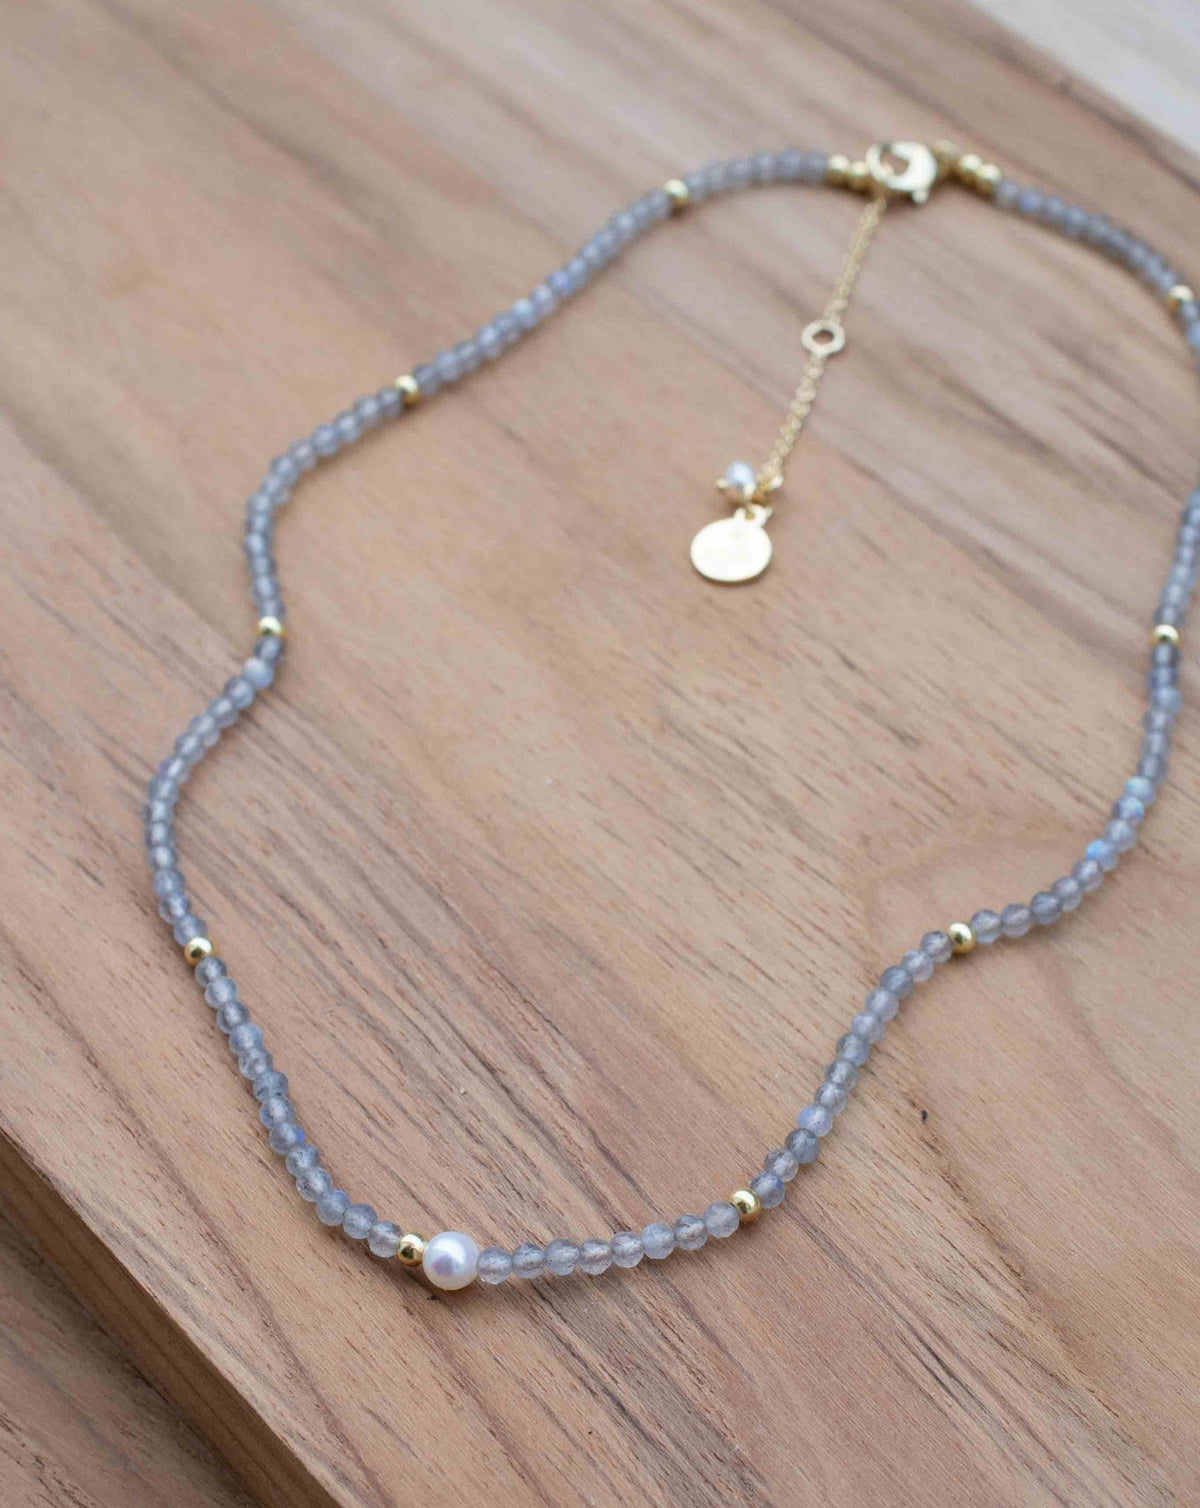 Turquoise, Labradorite and Rose Quartz Necklace* Gold Plated * Handmade * Layered * Gemstone * Birthstone * Gift for Her *BJN177